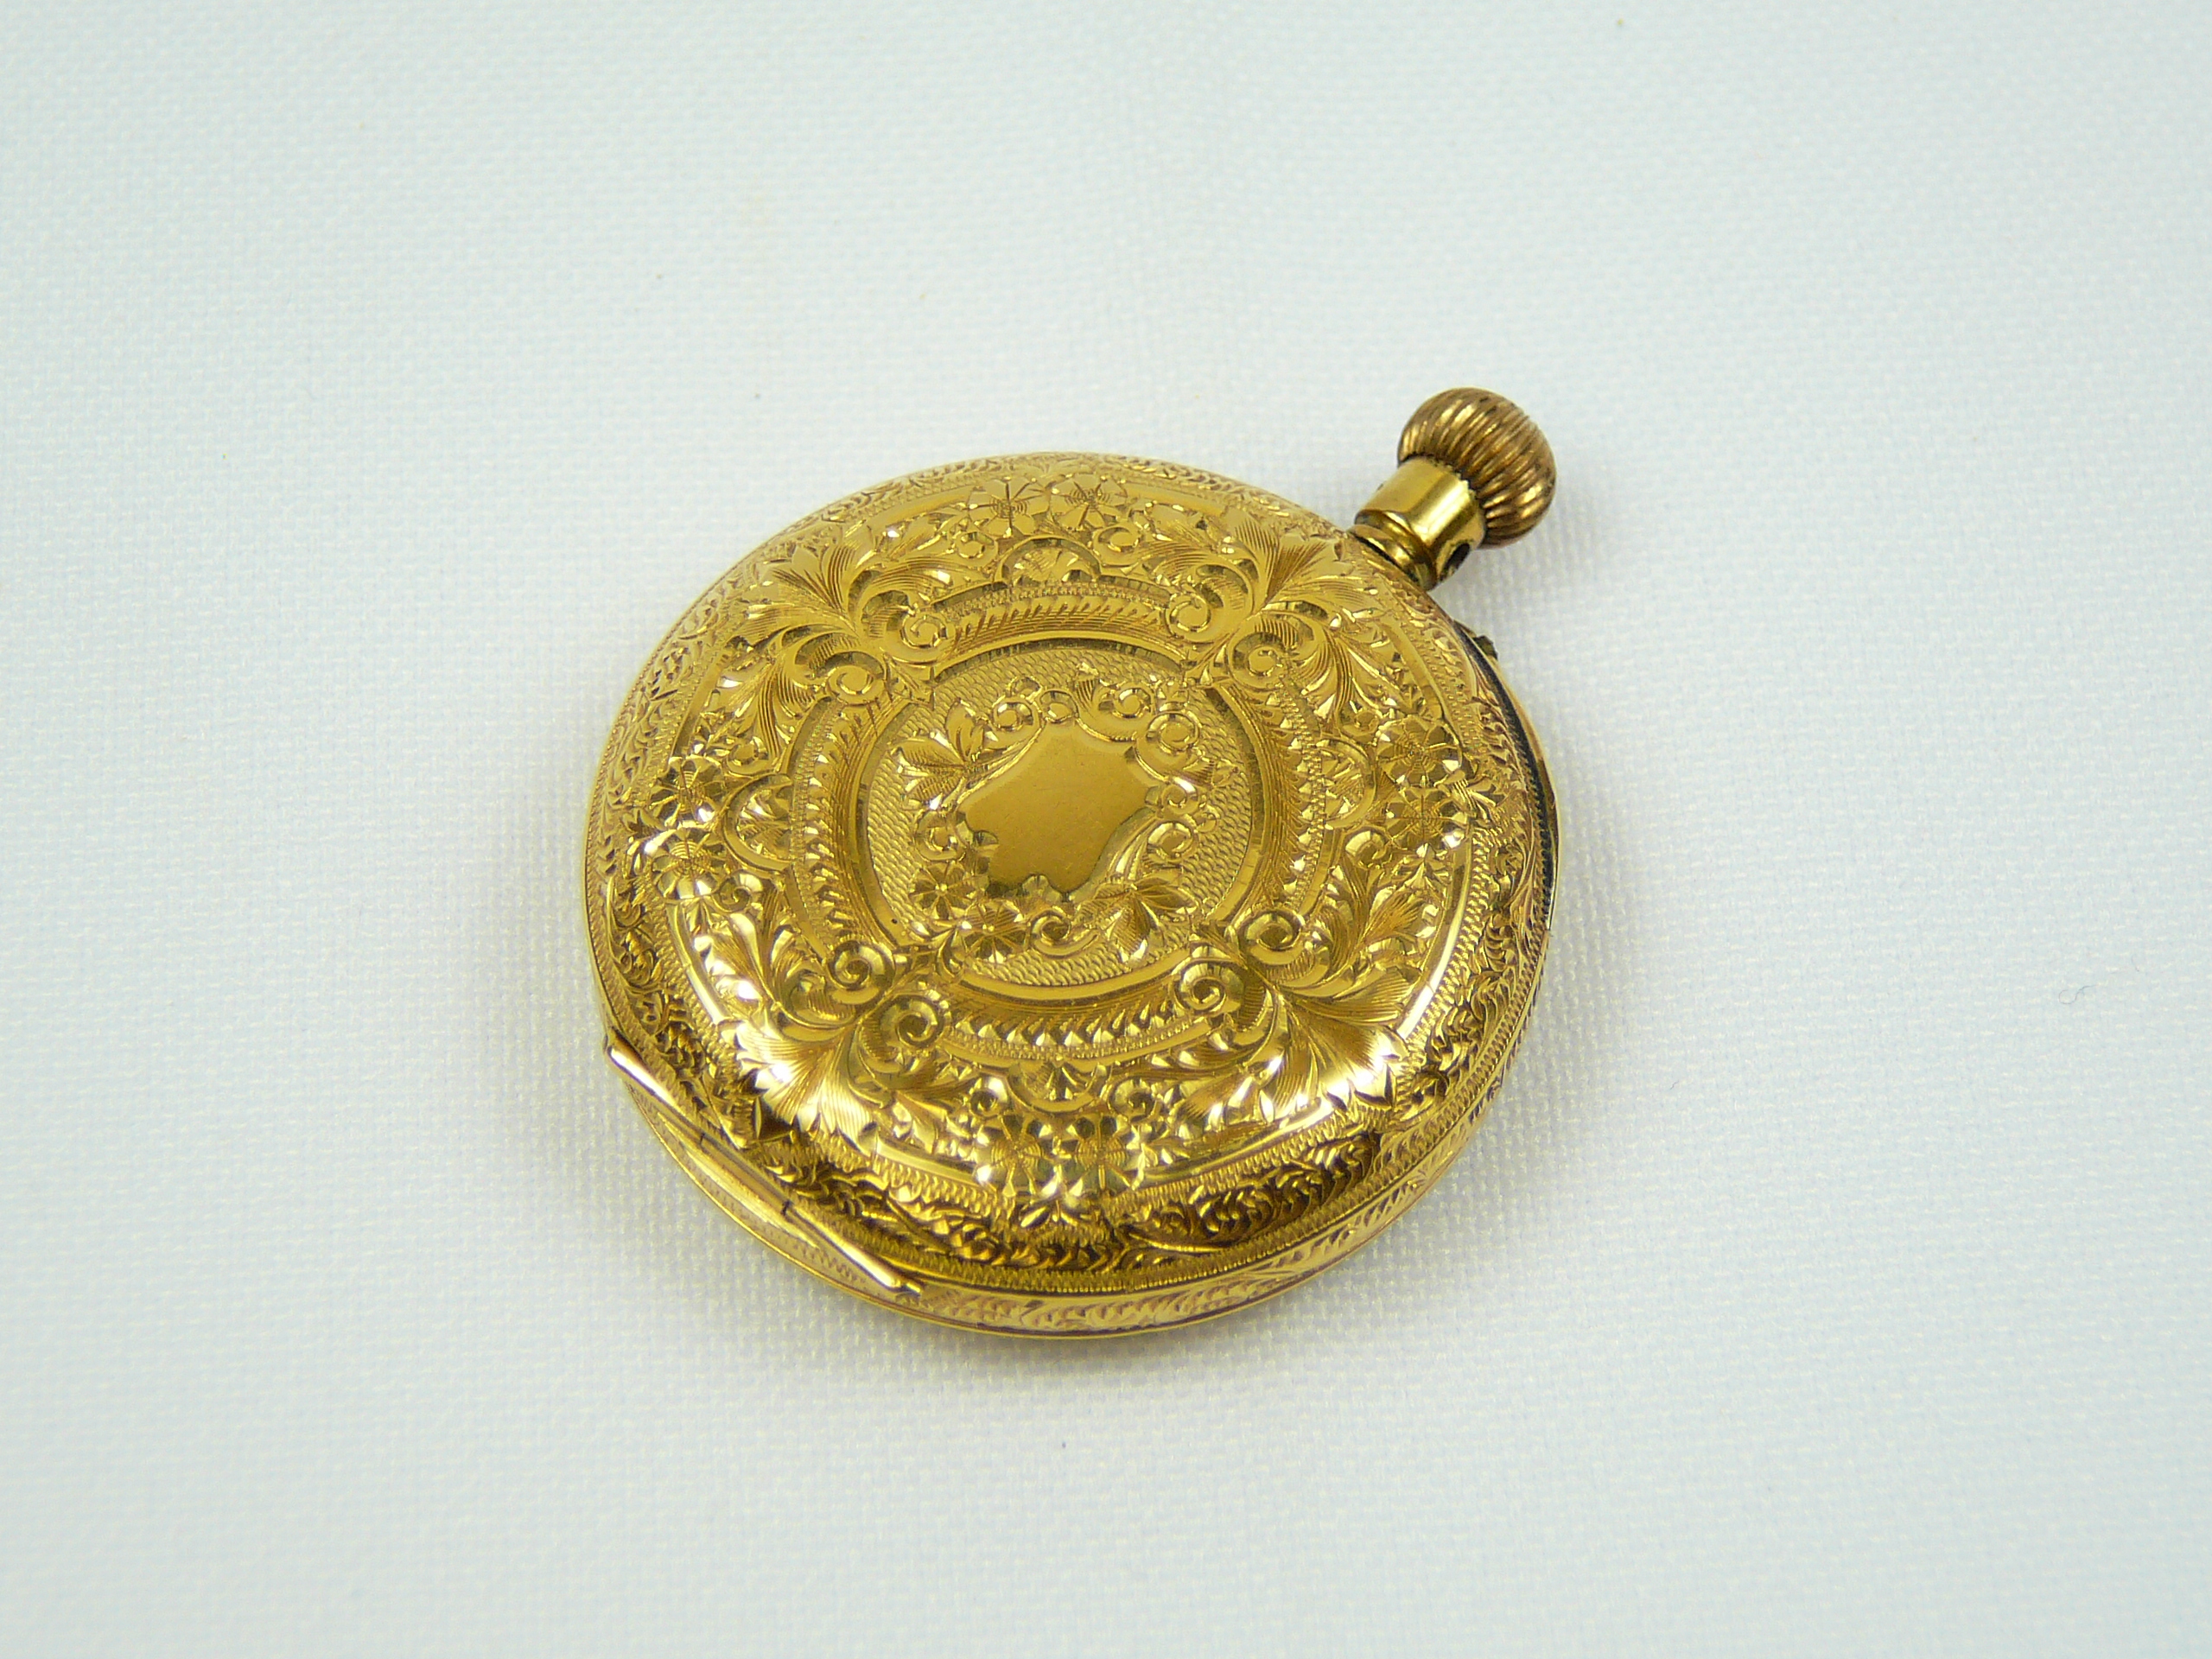 Ladies gold fob watch - Image 2 of 4